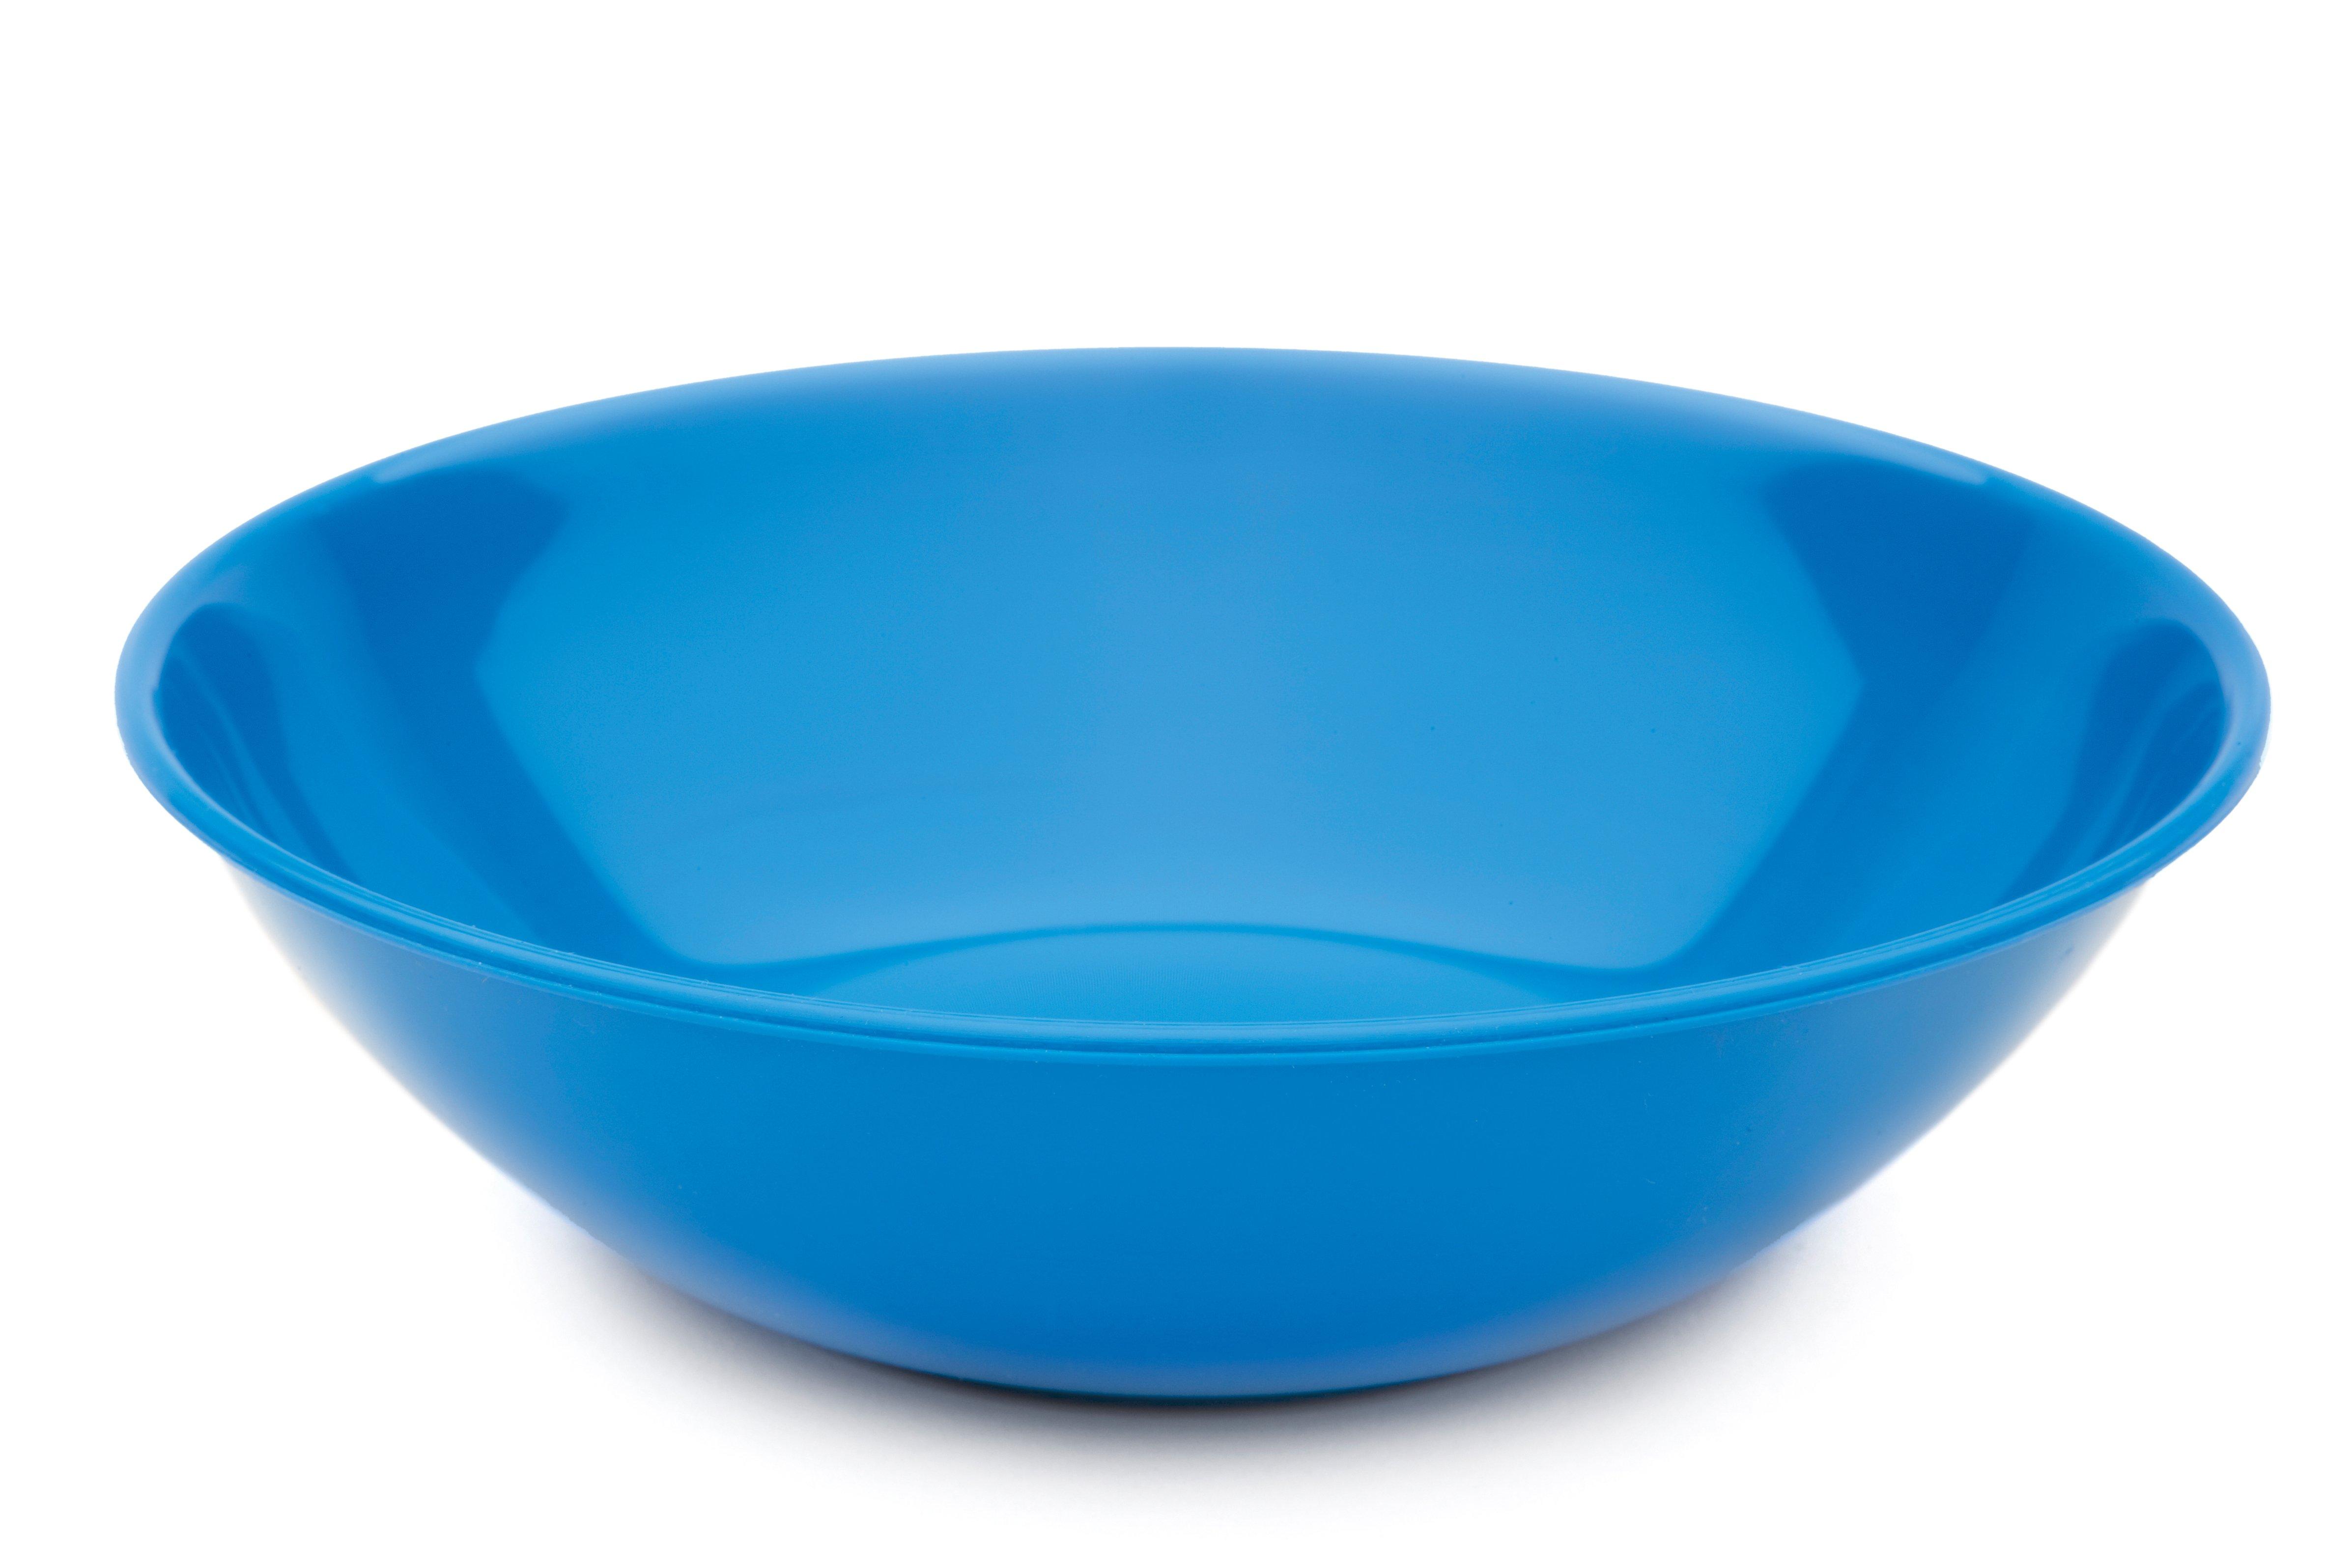 Harfield Blue Cereal Polycarbonate Bowl